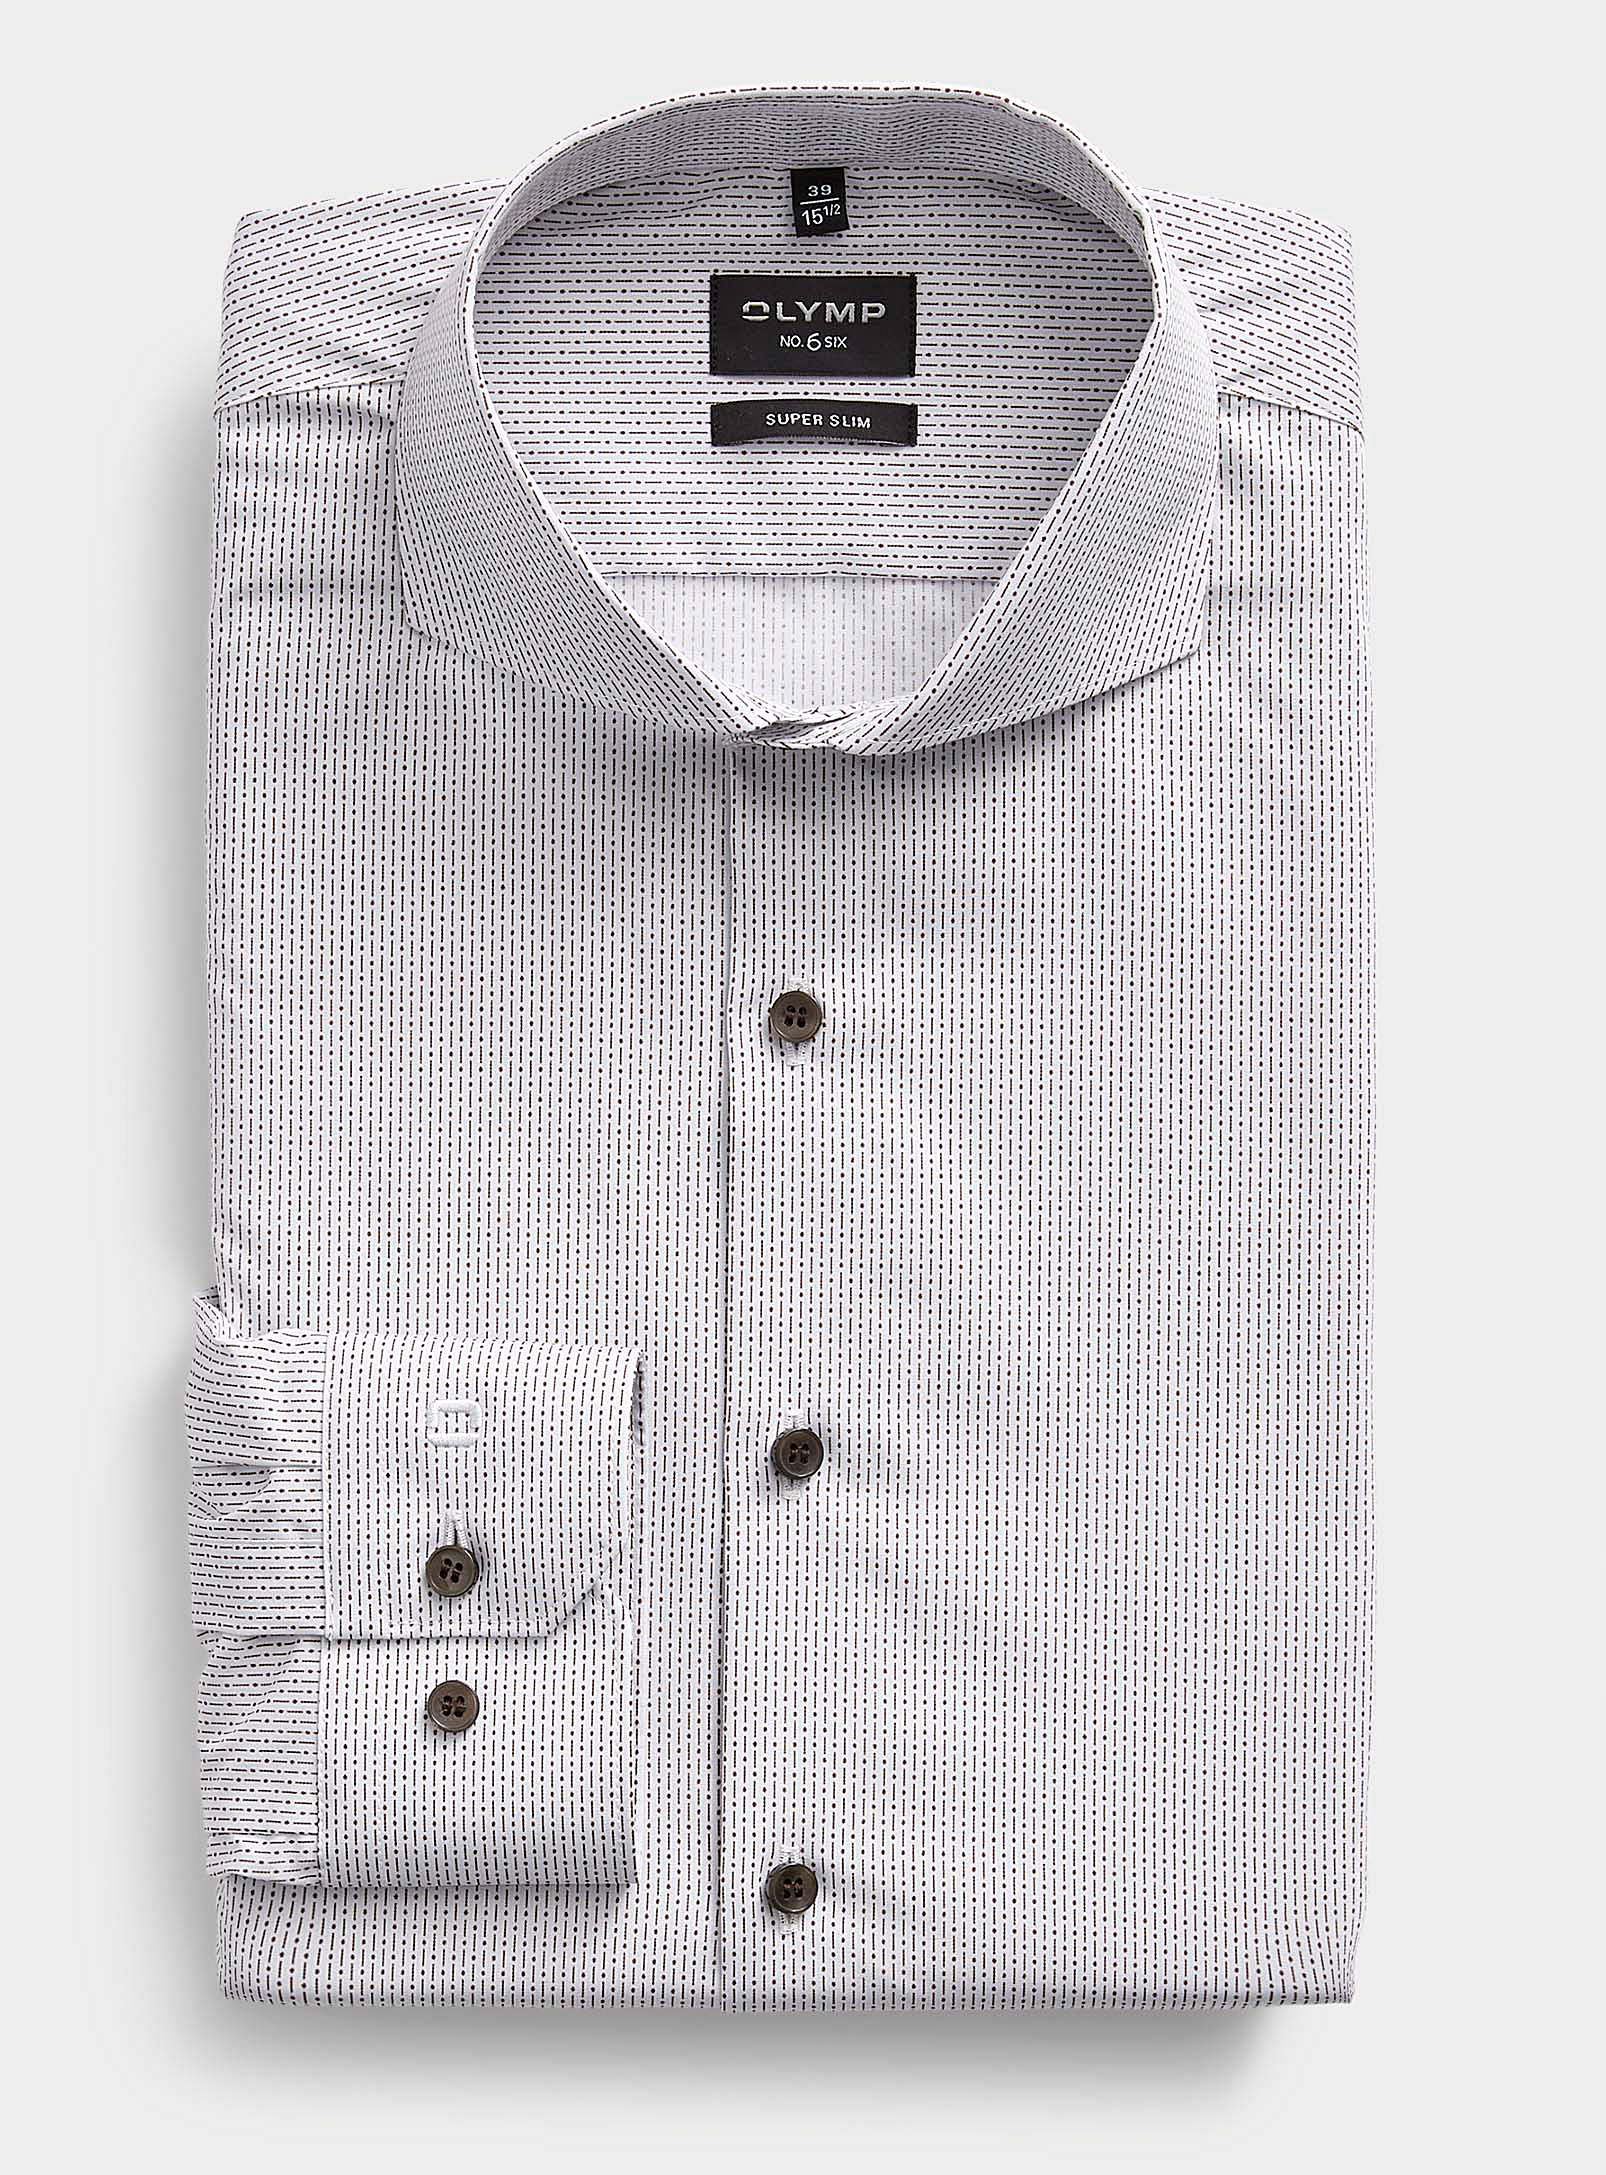 Olymp - Men's Dotted line shirt Slim fit